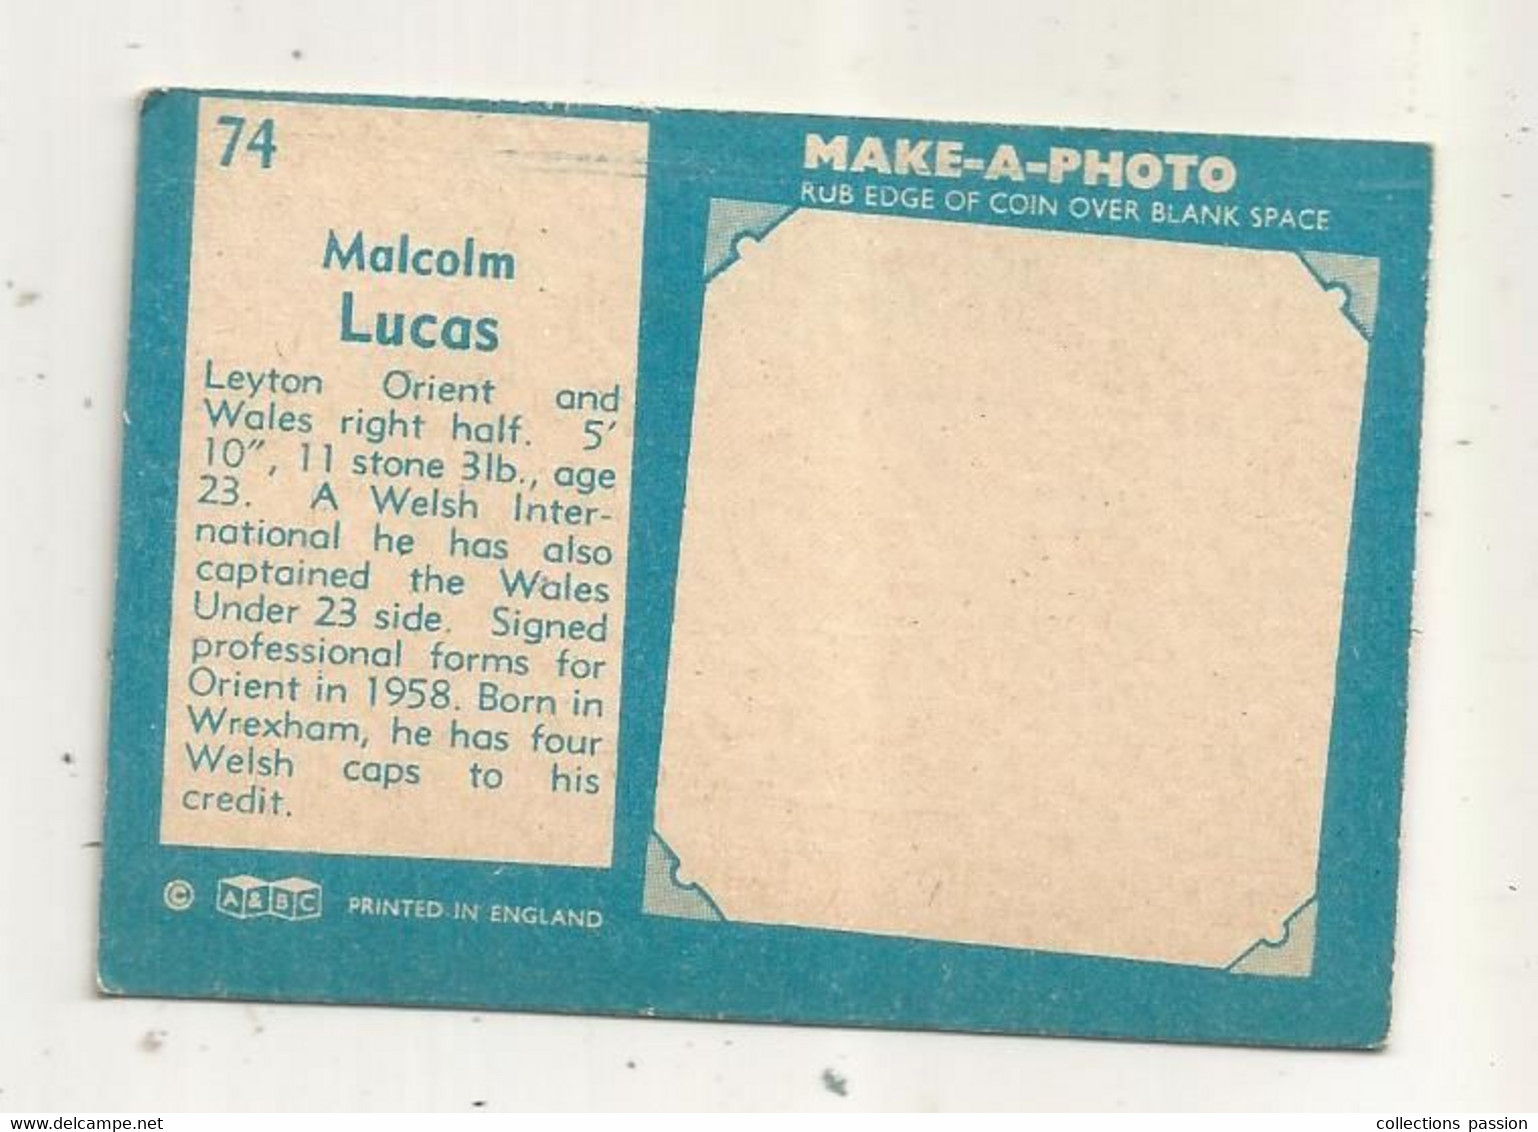 Trading Card , A&BC , England , Chewing Gum , Serie : Make A Photo , Année 60 , N° 74 , MALCOLM LUCAS , Leyron Orient - Trading Cards